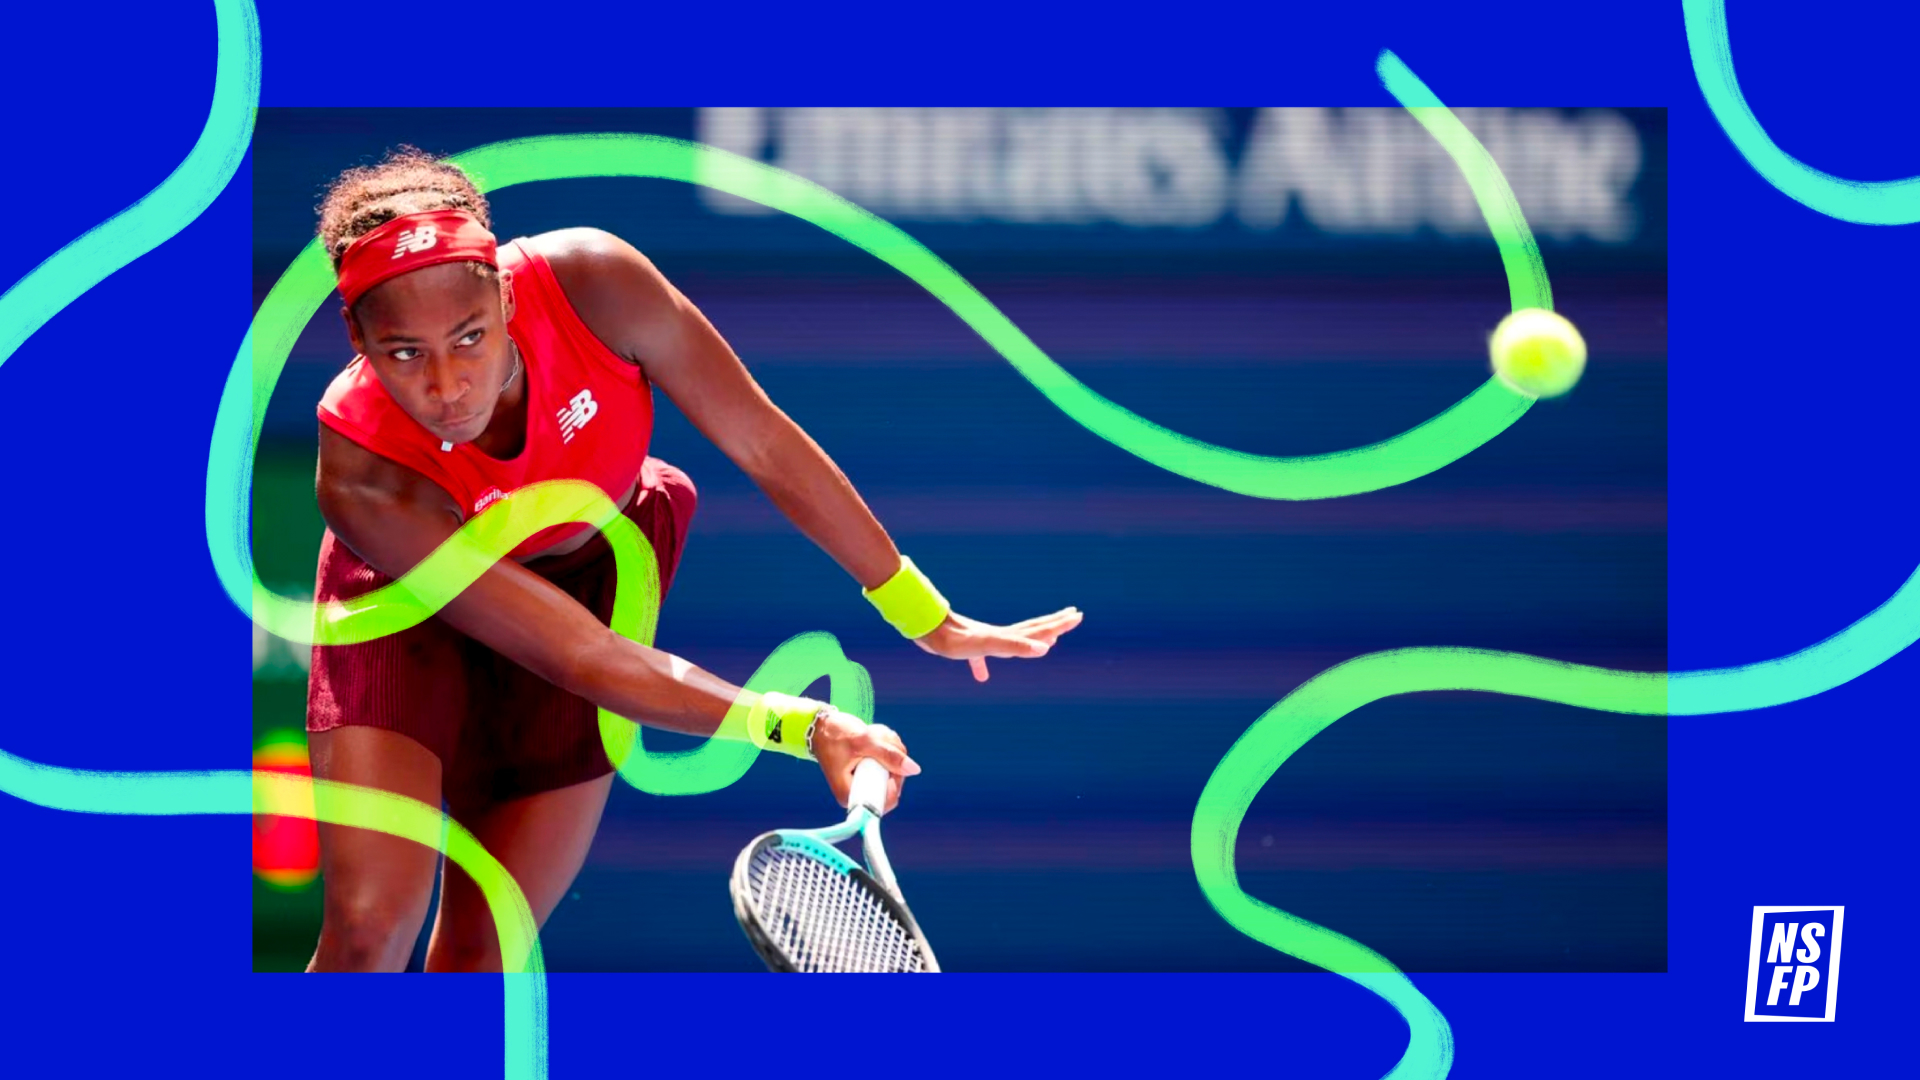 Photo illustration of Coco Gauff about to hit a tennis ball surrounded by green squiggly lines and blue background.